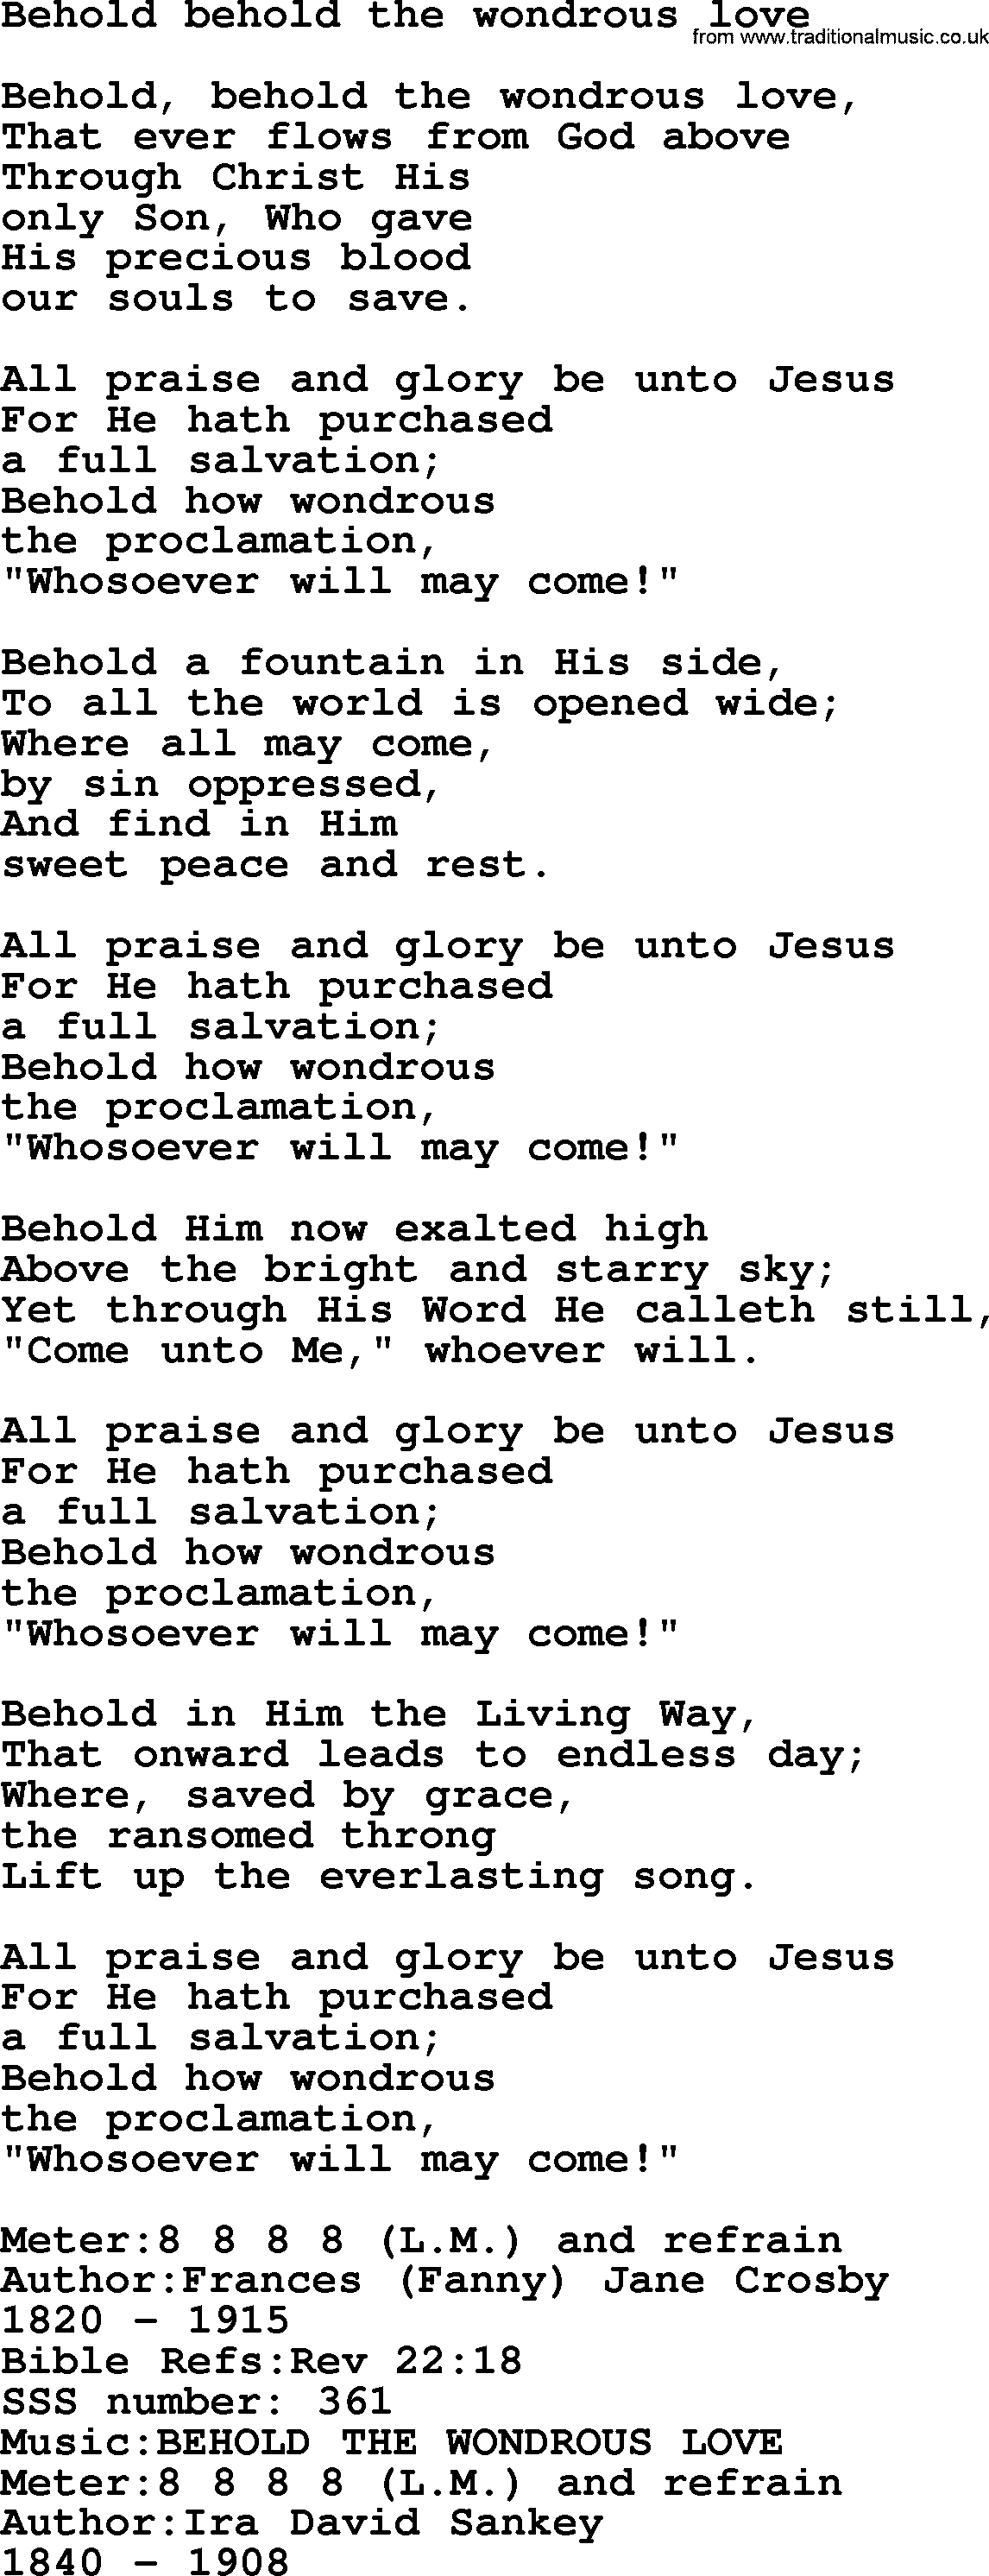 Sacred Songs and Solos complete, 1200 Hymns, title: Behold Behold The Wondrous Love, lyrics and PDF